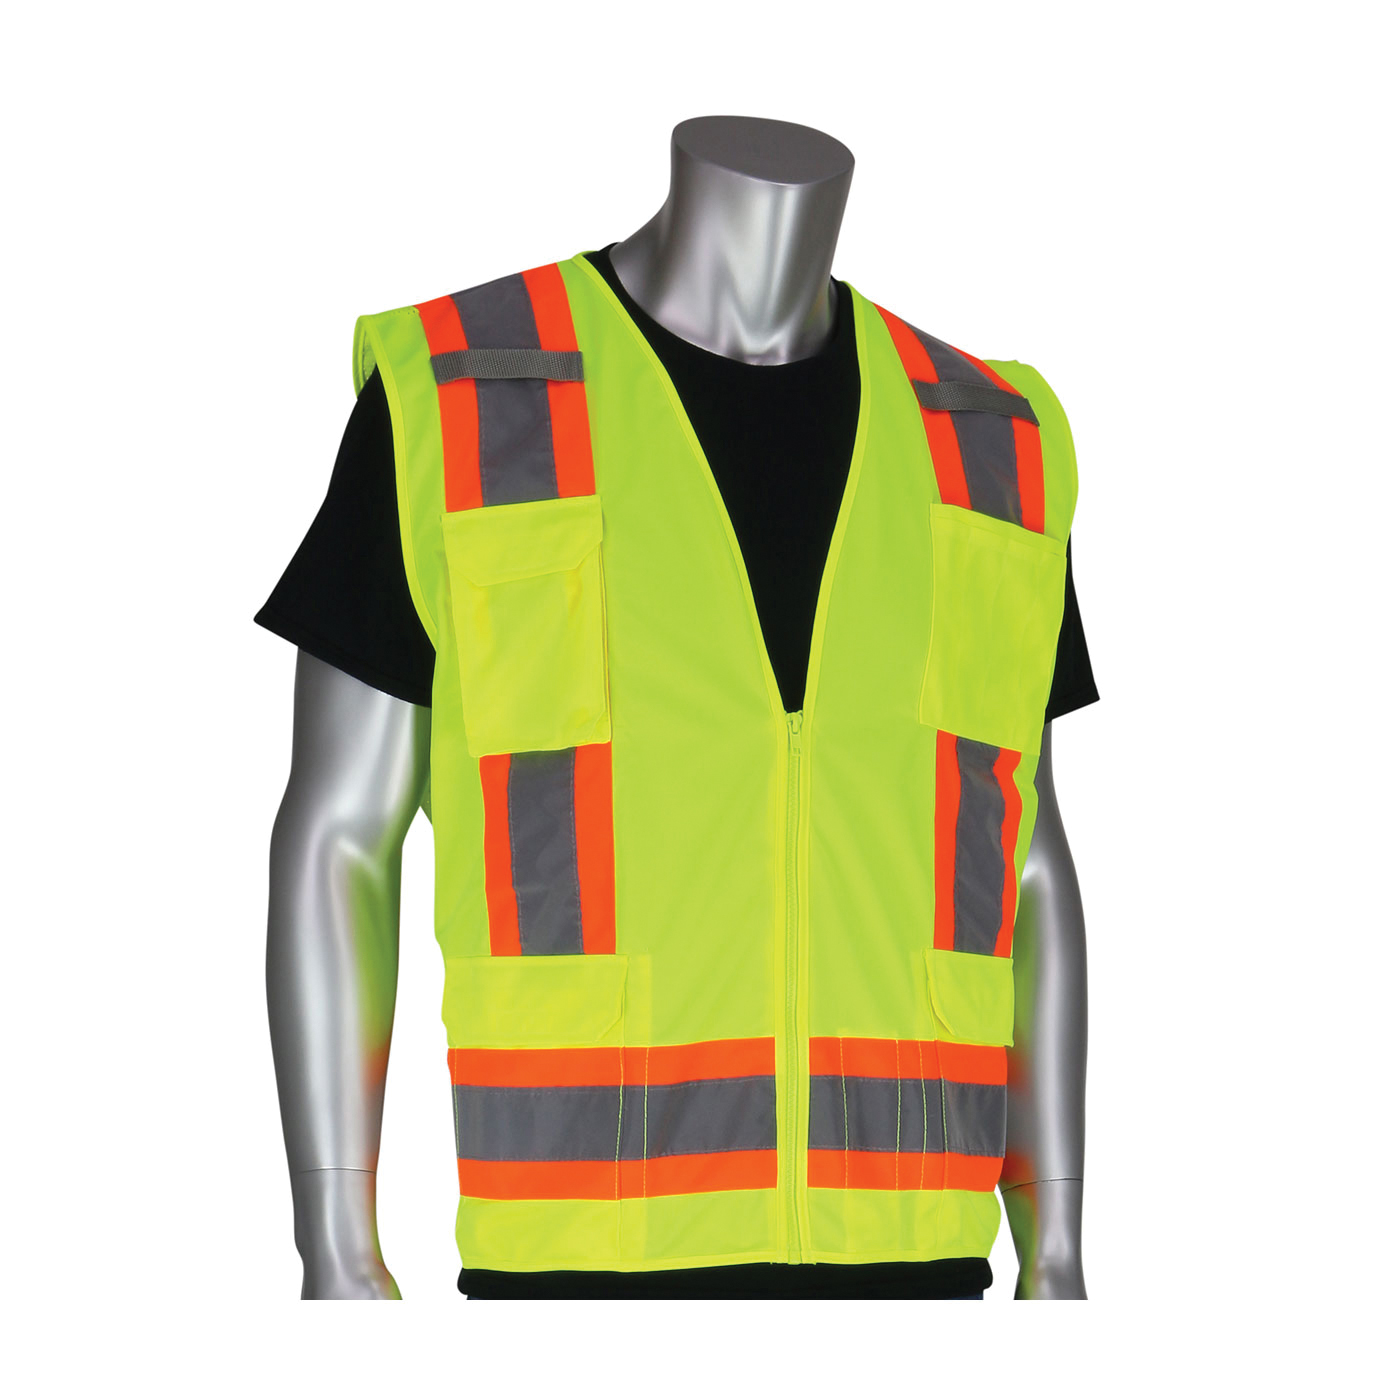 PIP® 302-0500S-YEL/M 2-Tone Surveyor Safety Vest, M, Hi-Viz Lime Yellow, Polyester/Solid Tricot, Zipper Closure, 11 Pockets, ANSI Class: Class 2, Specifications Met: ANSI 107 Type R